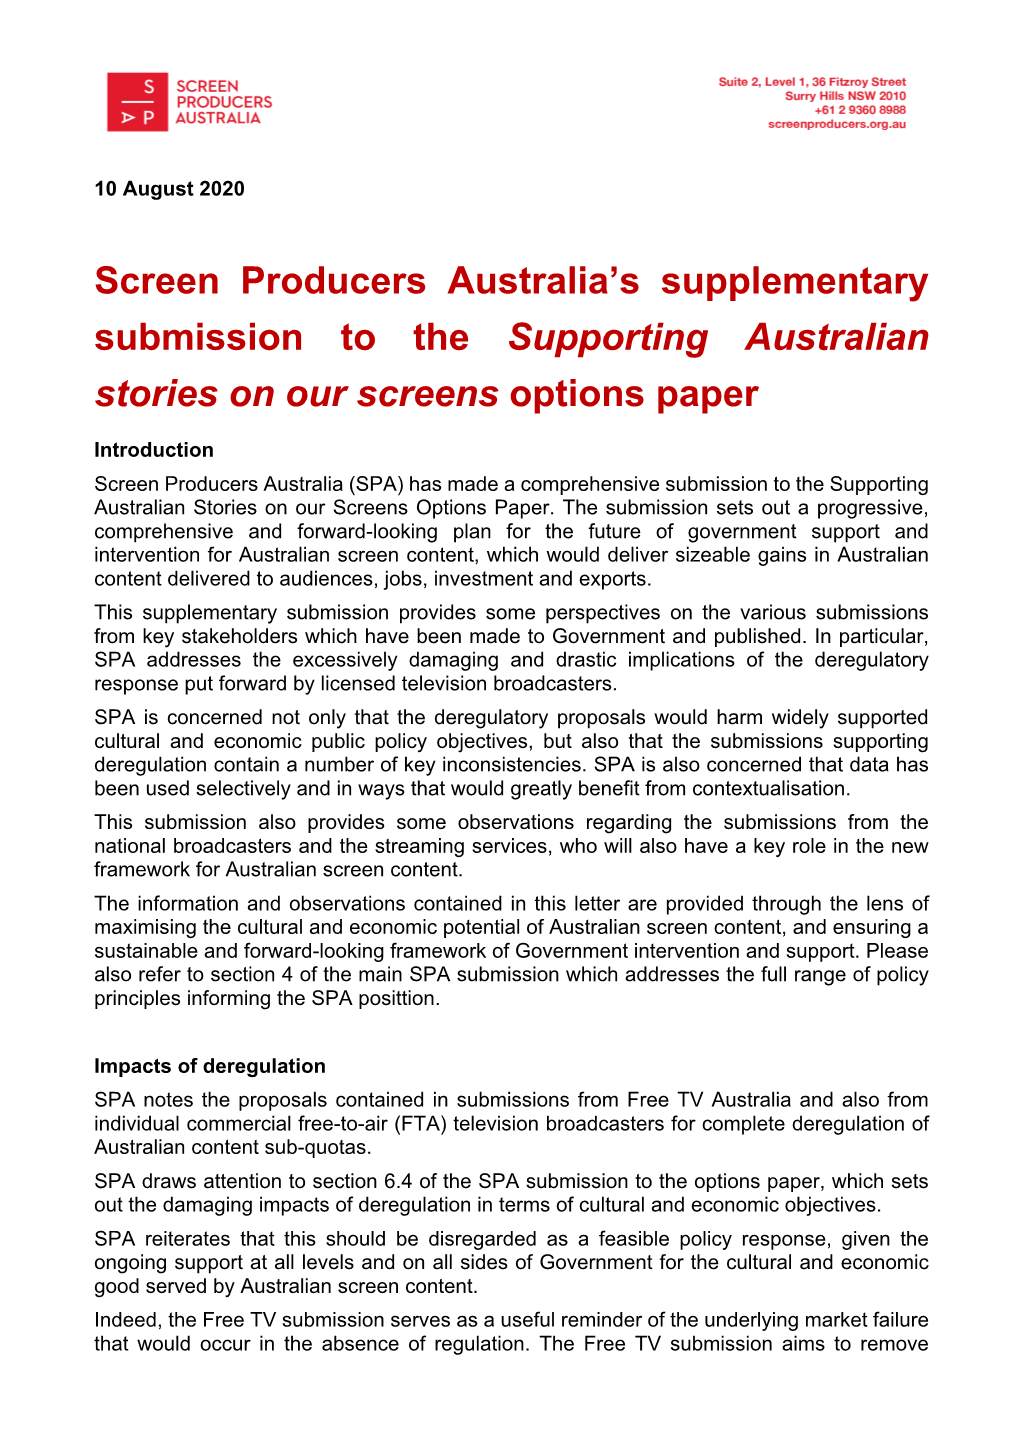 Screen Producers Australia's Supplementary Submission to the Supporting Australian Stories on Our Screens Options Paper